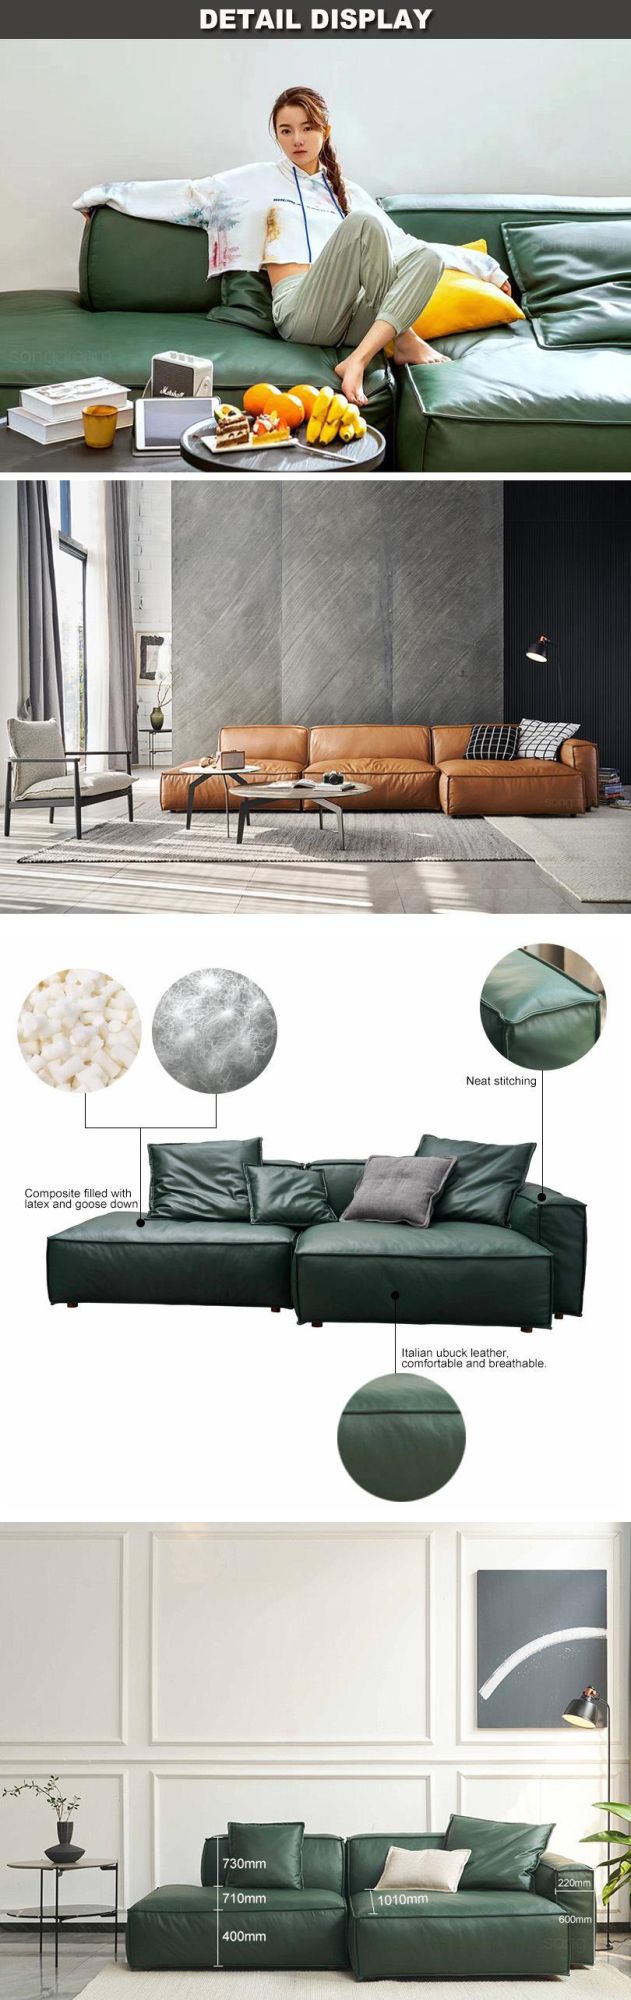 Modular Latex and Goose Down Composite Filling Sectional Leather Sofa for Home Decoration